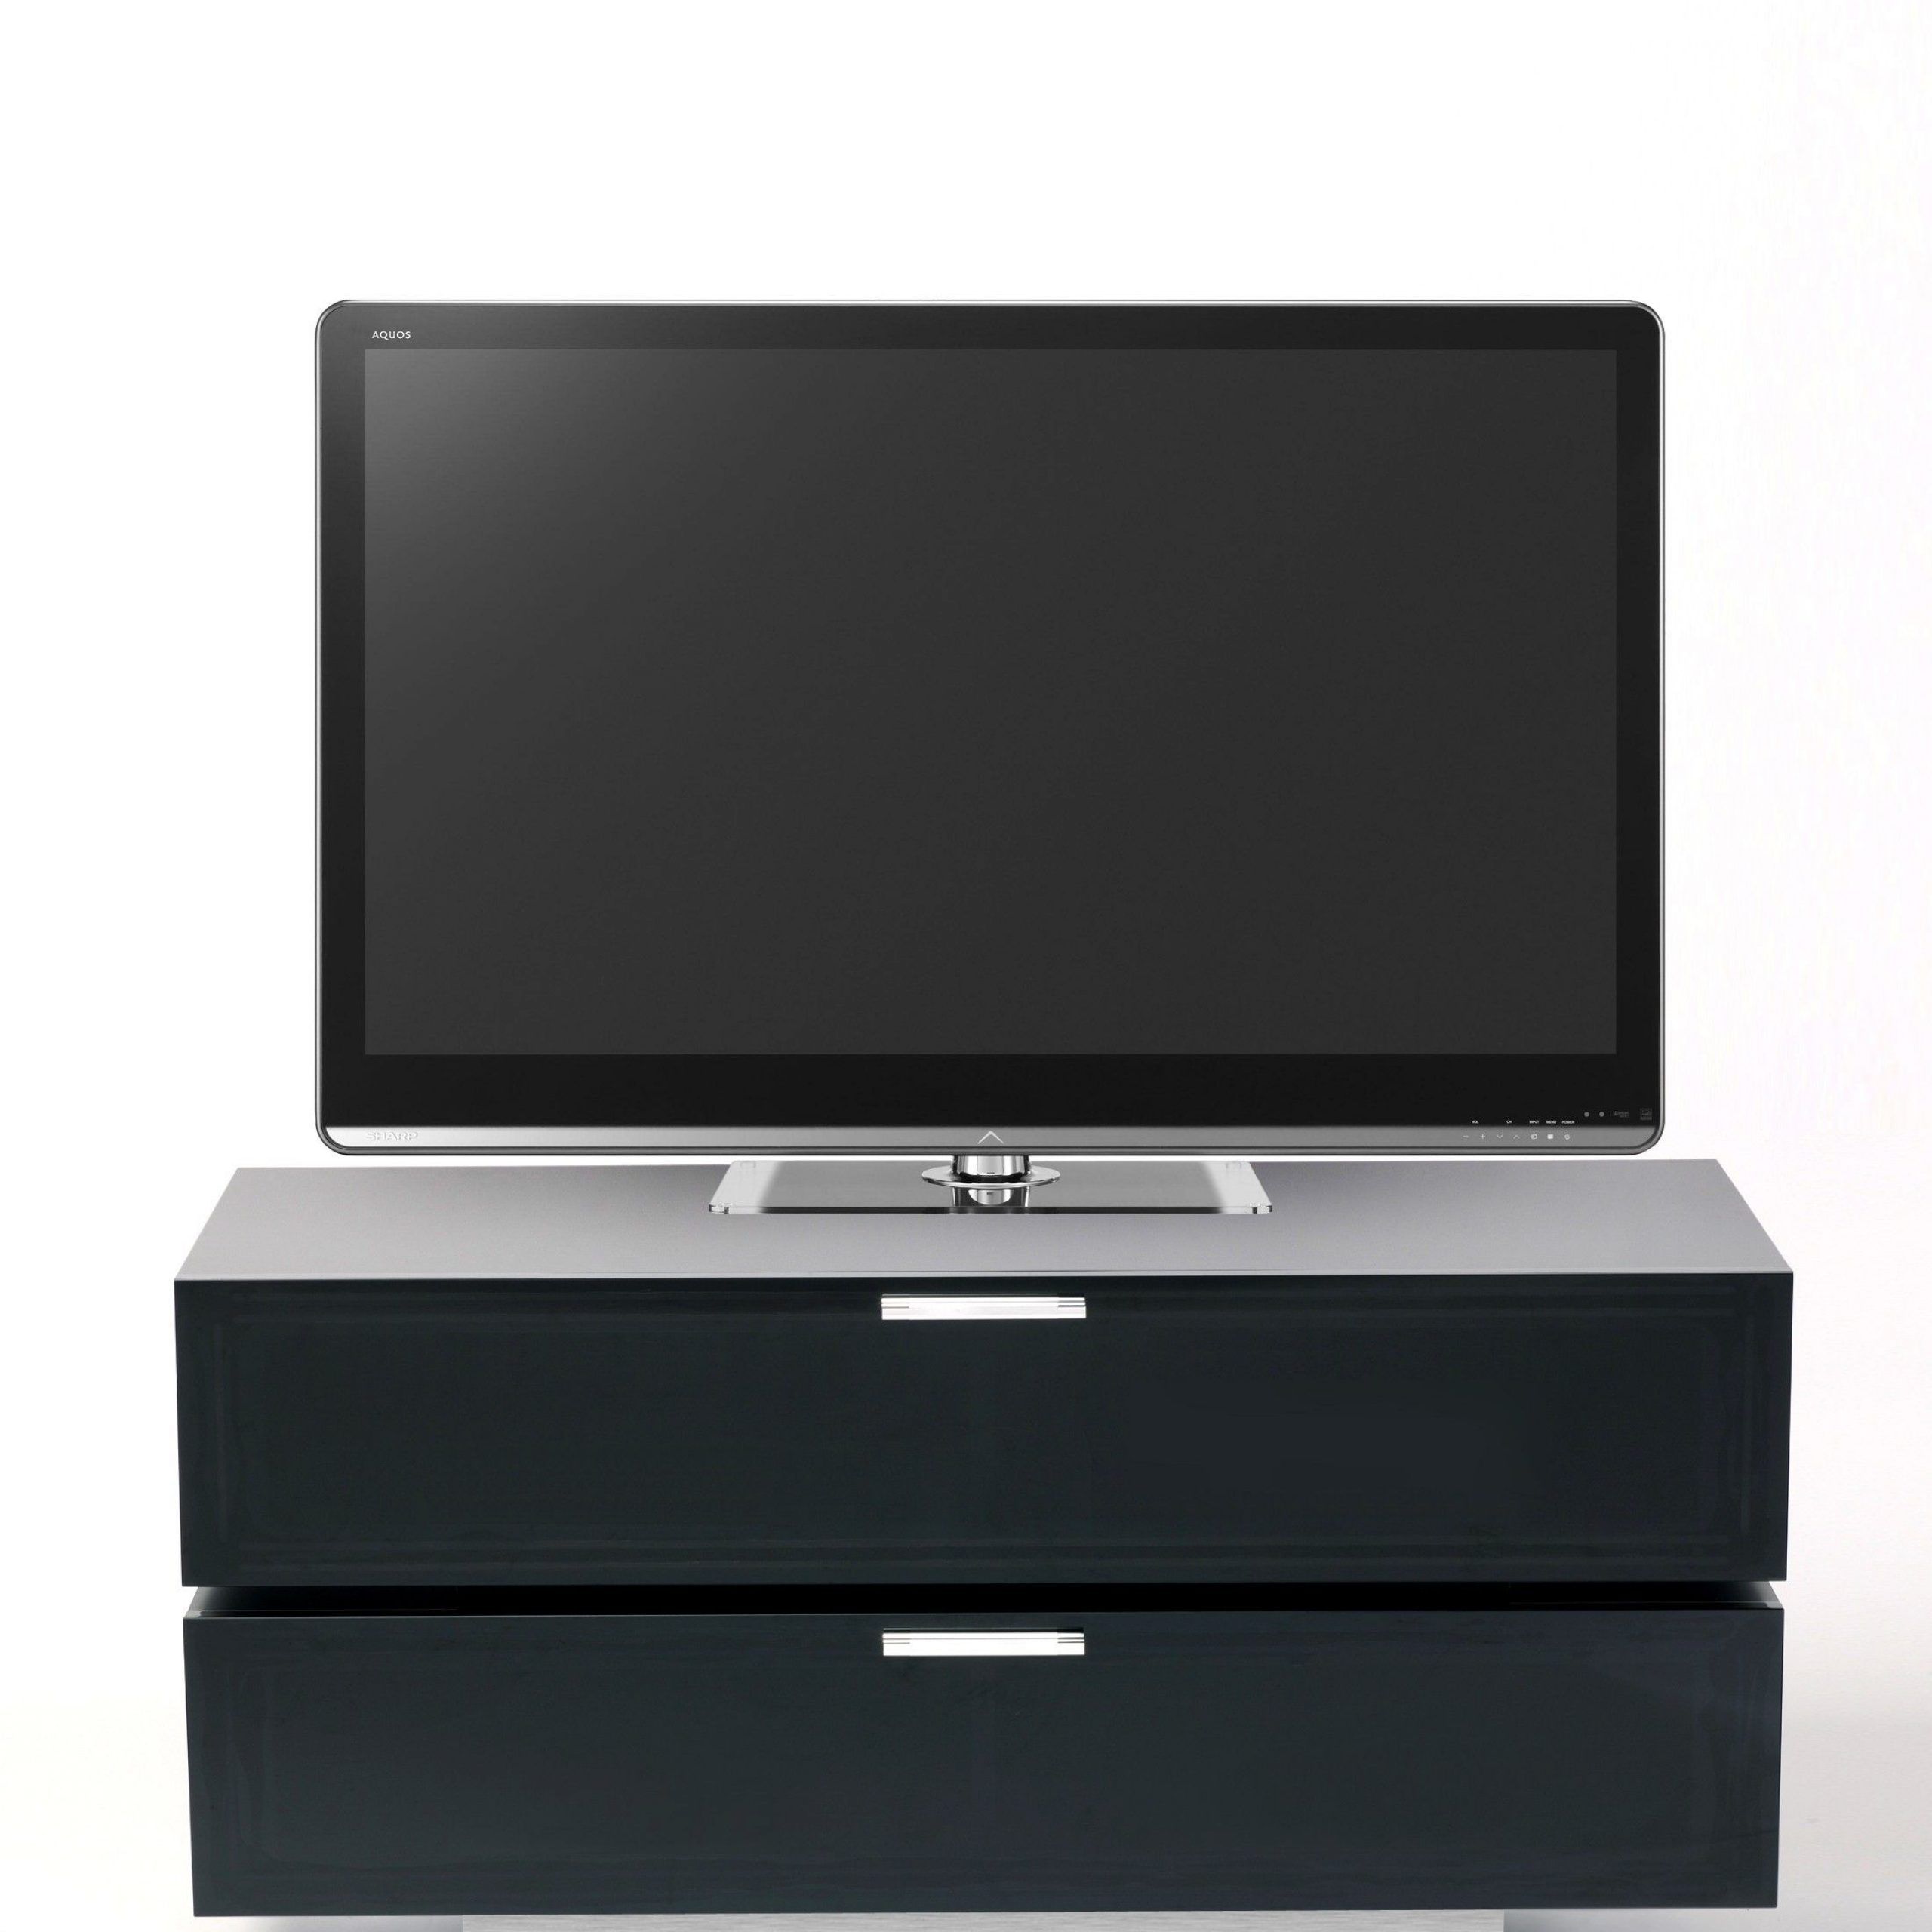 Stil Stand Black Gloss Tv Cabinet With Alu Plinth Stuk4001 Pertaining To Stil Tv Stands (View 7 of 15)